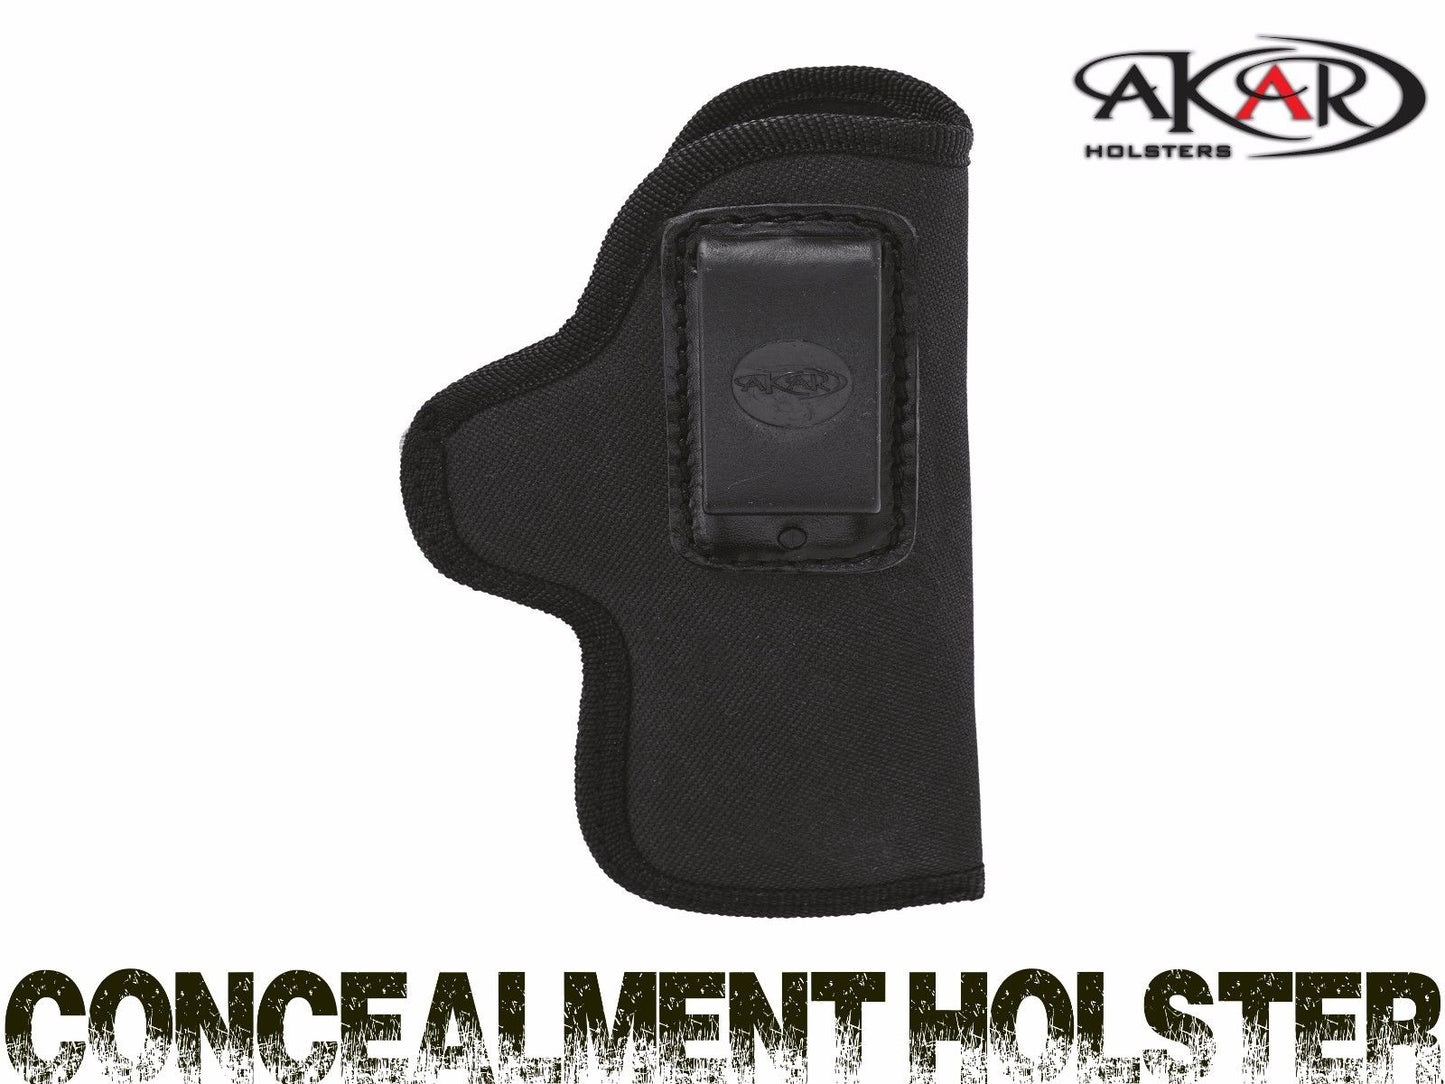 S&W SHIELD 9mm Concealed Carry Nylon IWB-Inside The Waistband Clip Pistol-Option